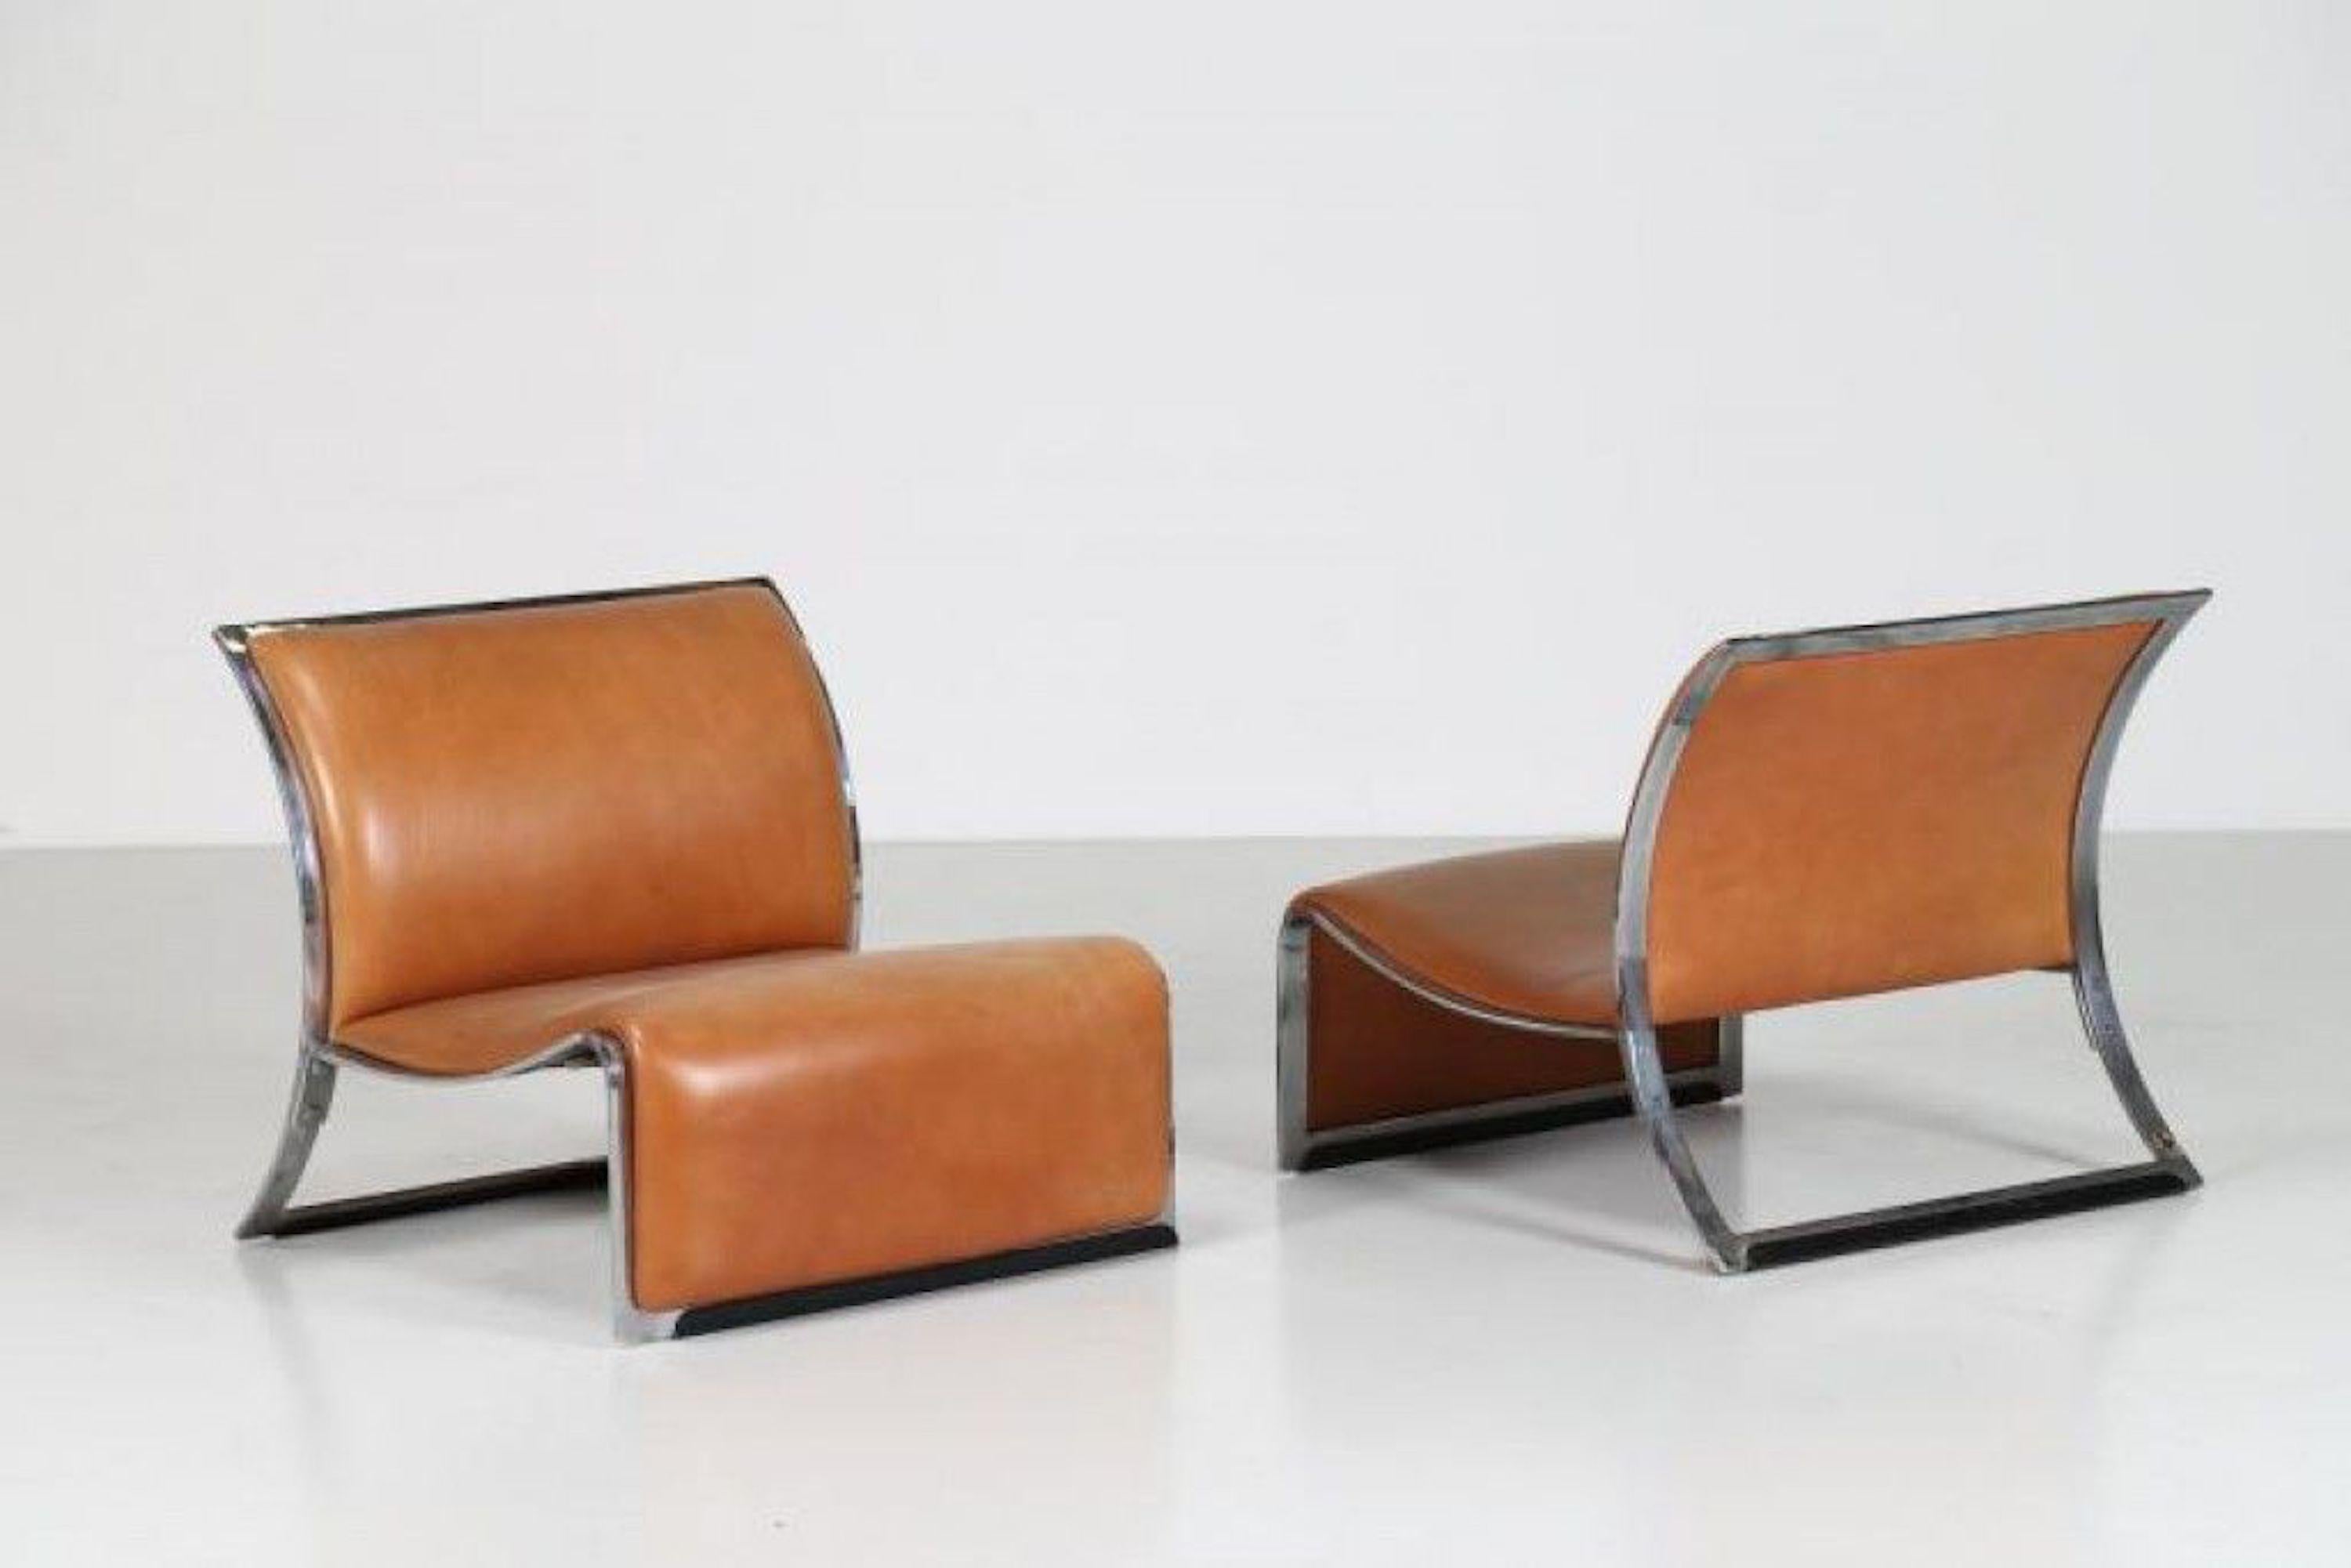 Polychromed Pair of Vintage Armchairs in Metal and Leather by Vittorio Introini, 1960s